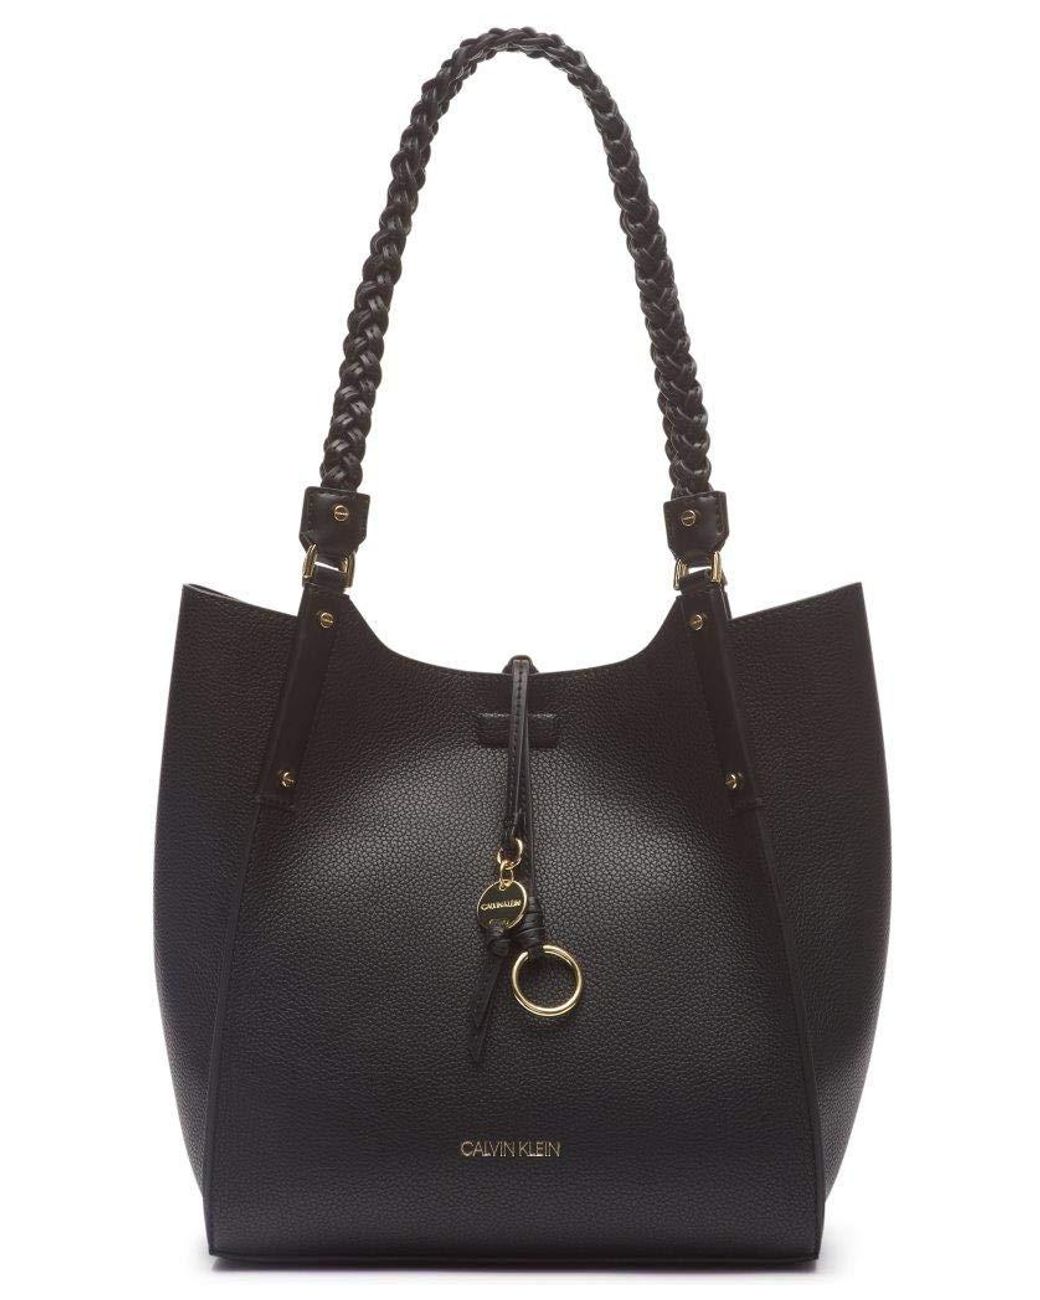 Calvin Klein Shelly Rocky Road Novelty Tote in Black/Gold (Black) - Lyst